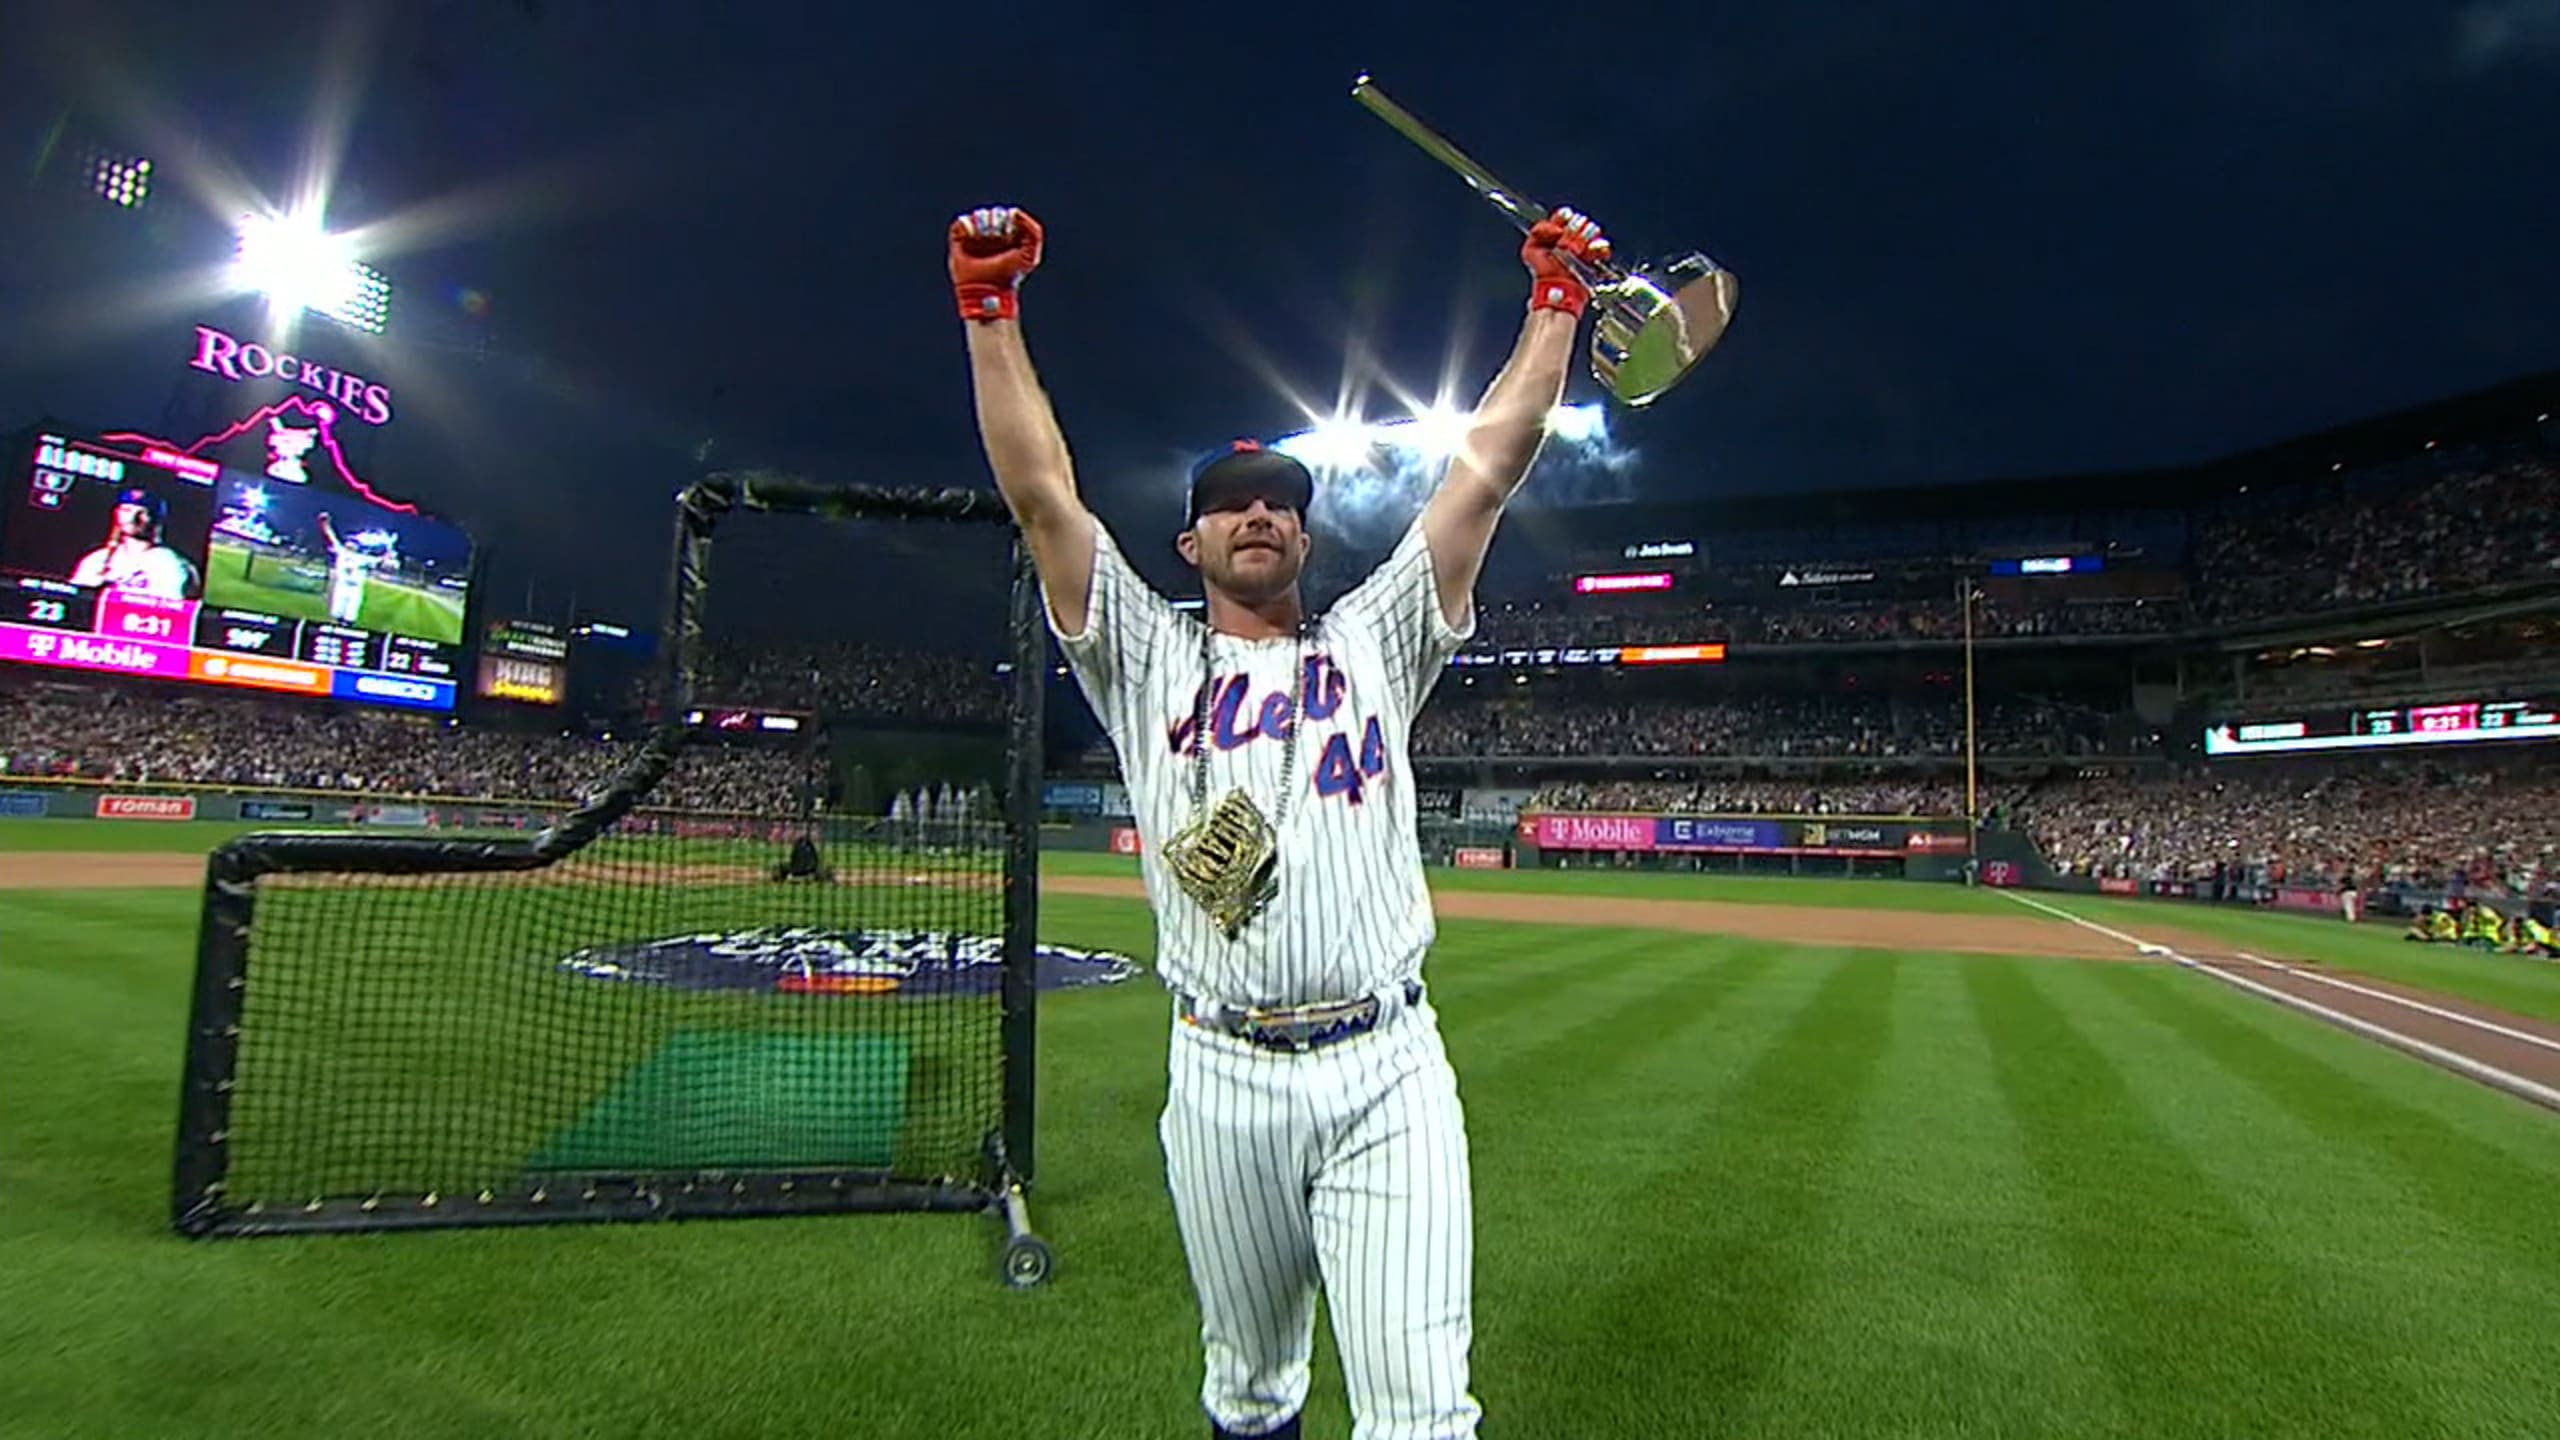 On a Night of Upsets, Pete Alonso Repeats as Home Run Derby Champ